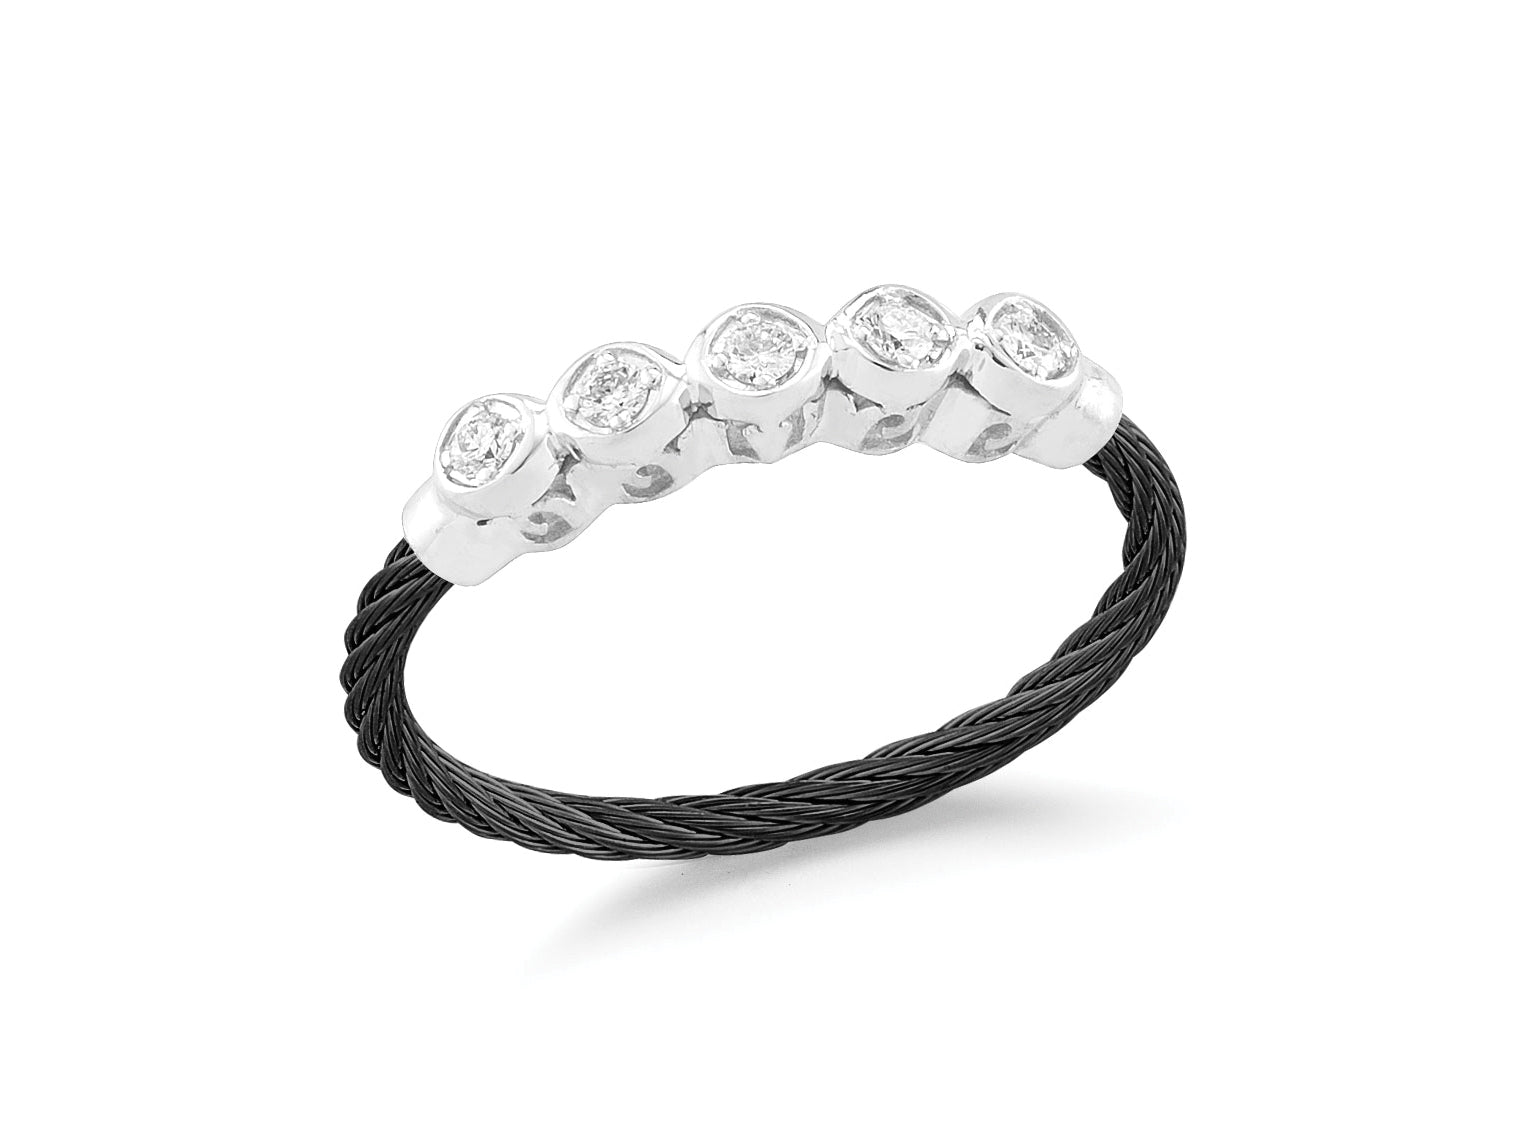 Alor Black cable, 18kt White Gold, 0.11 total carat weight Diamonds and stainless steel. Imported.